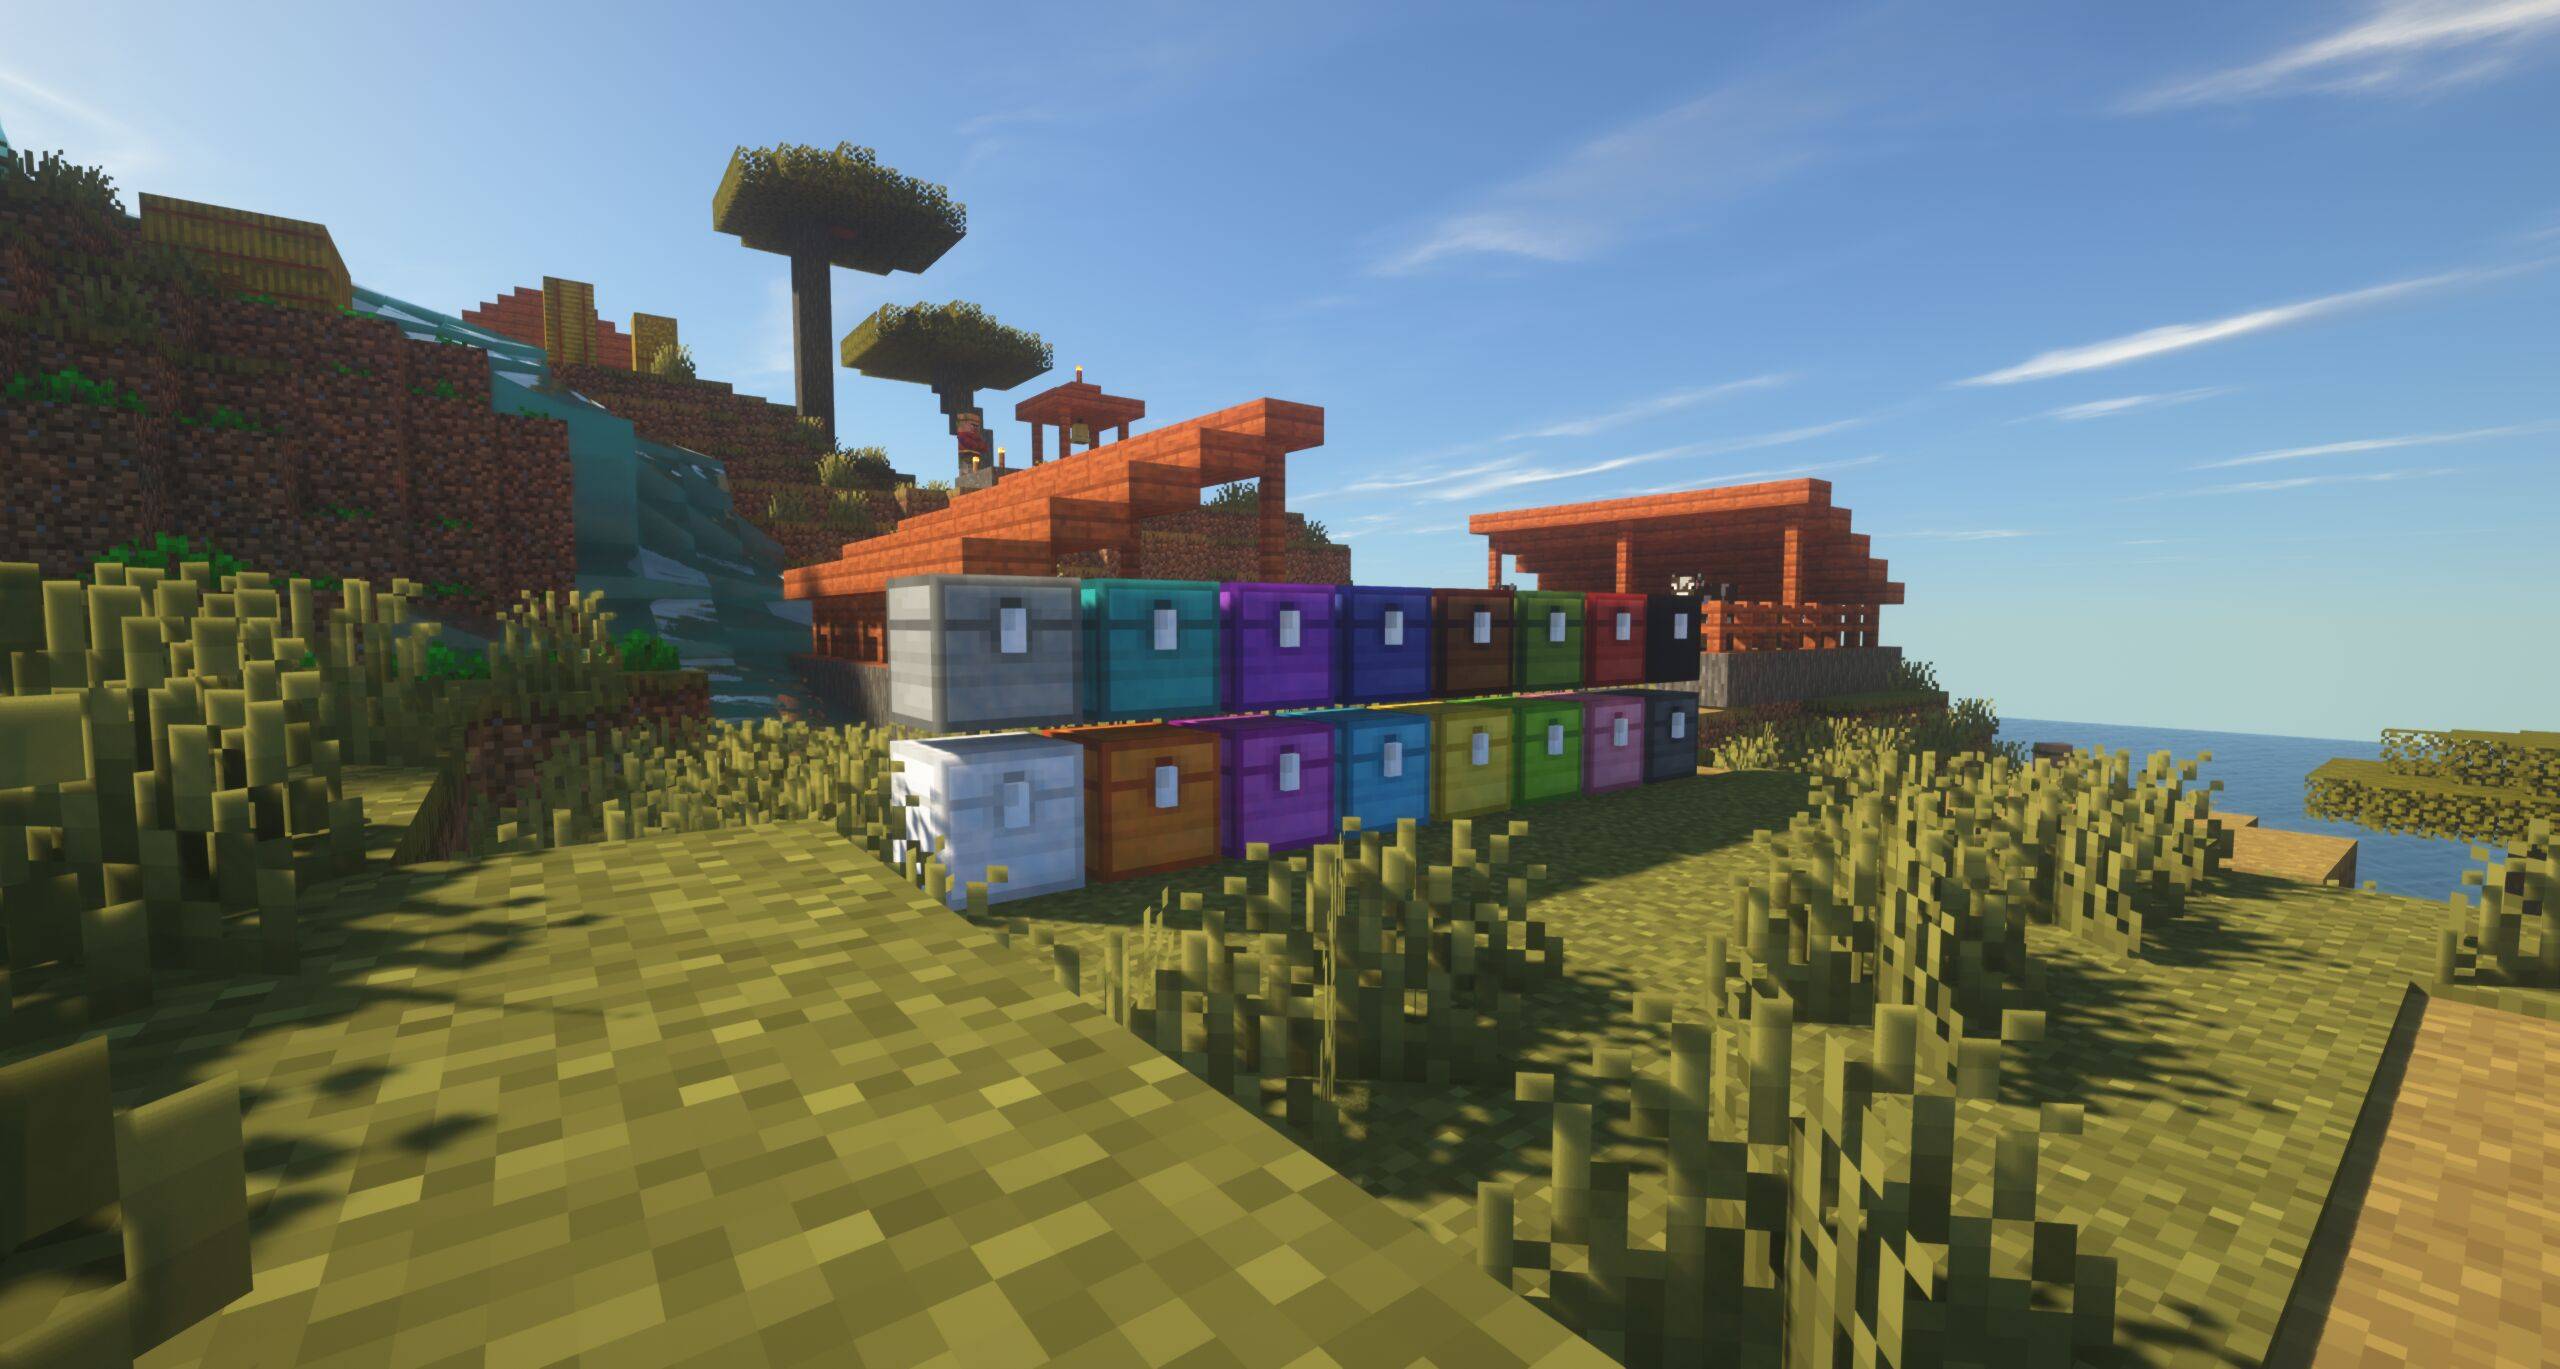 Colorful iron chests!